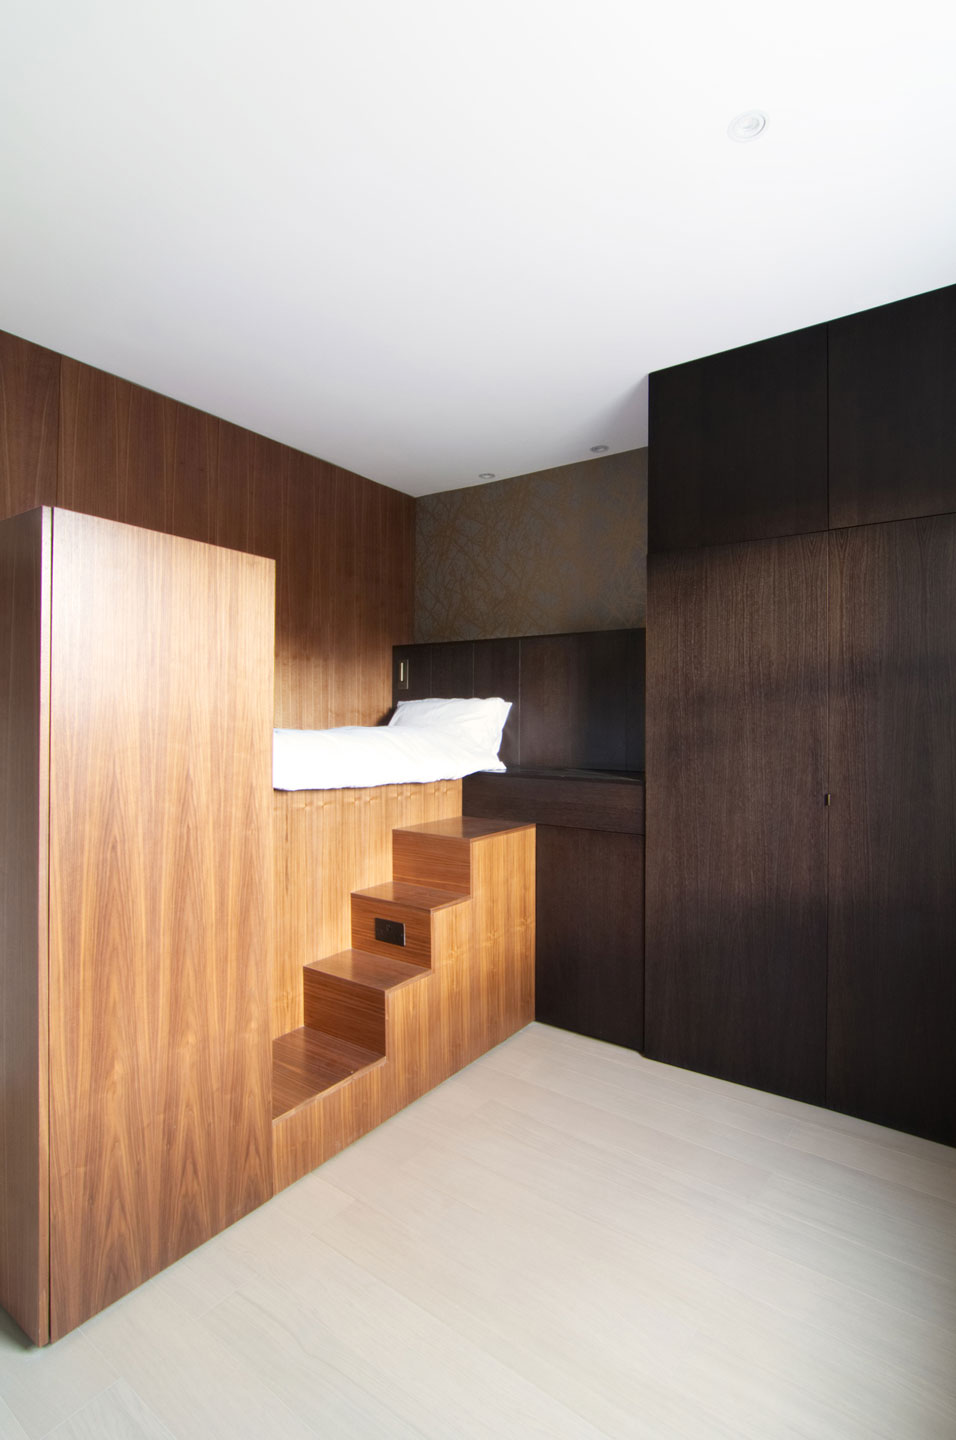 Each-of-the-18-sqm-small-apartments-has-a-smart-layout-that-depends-on-custom-wooden-structure-59592